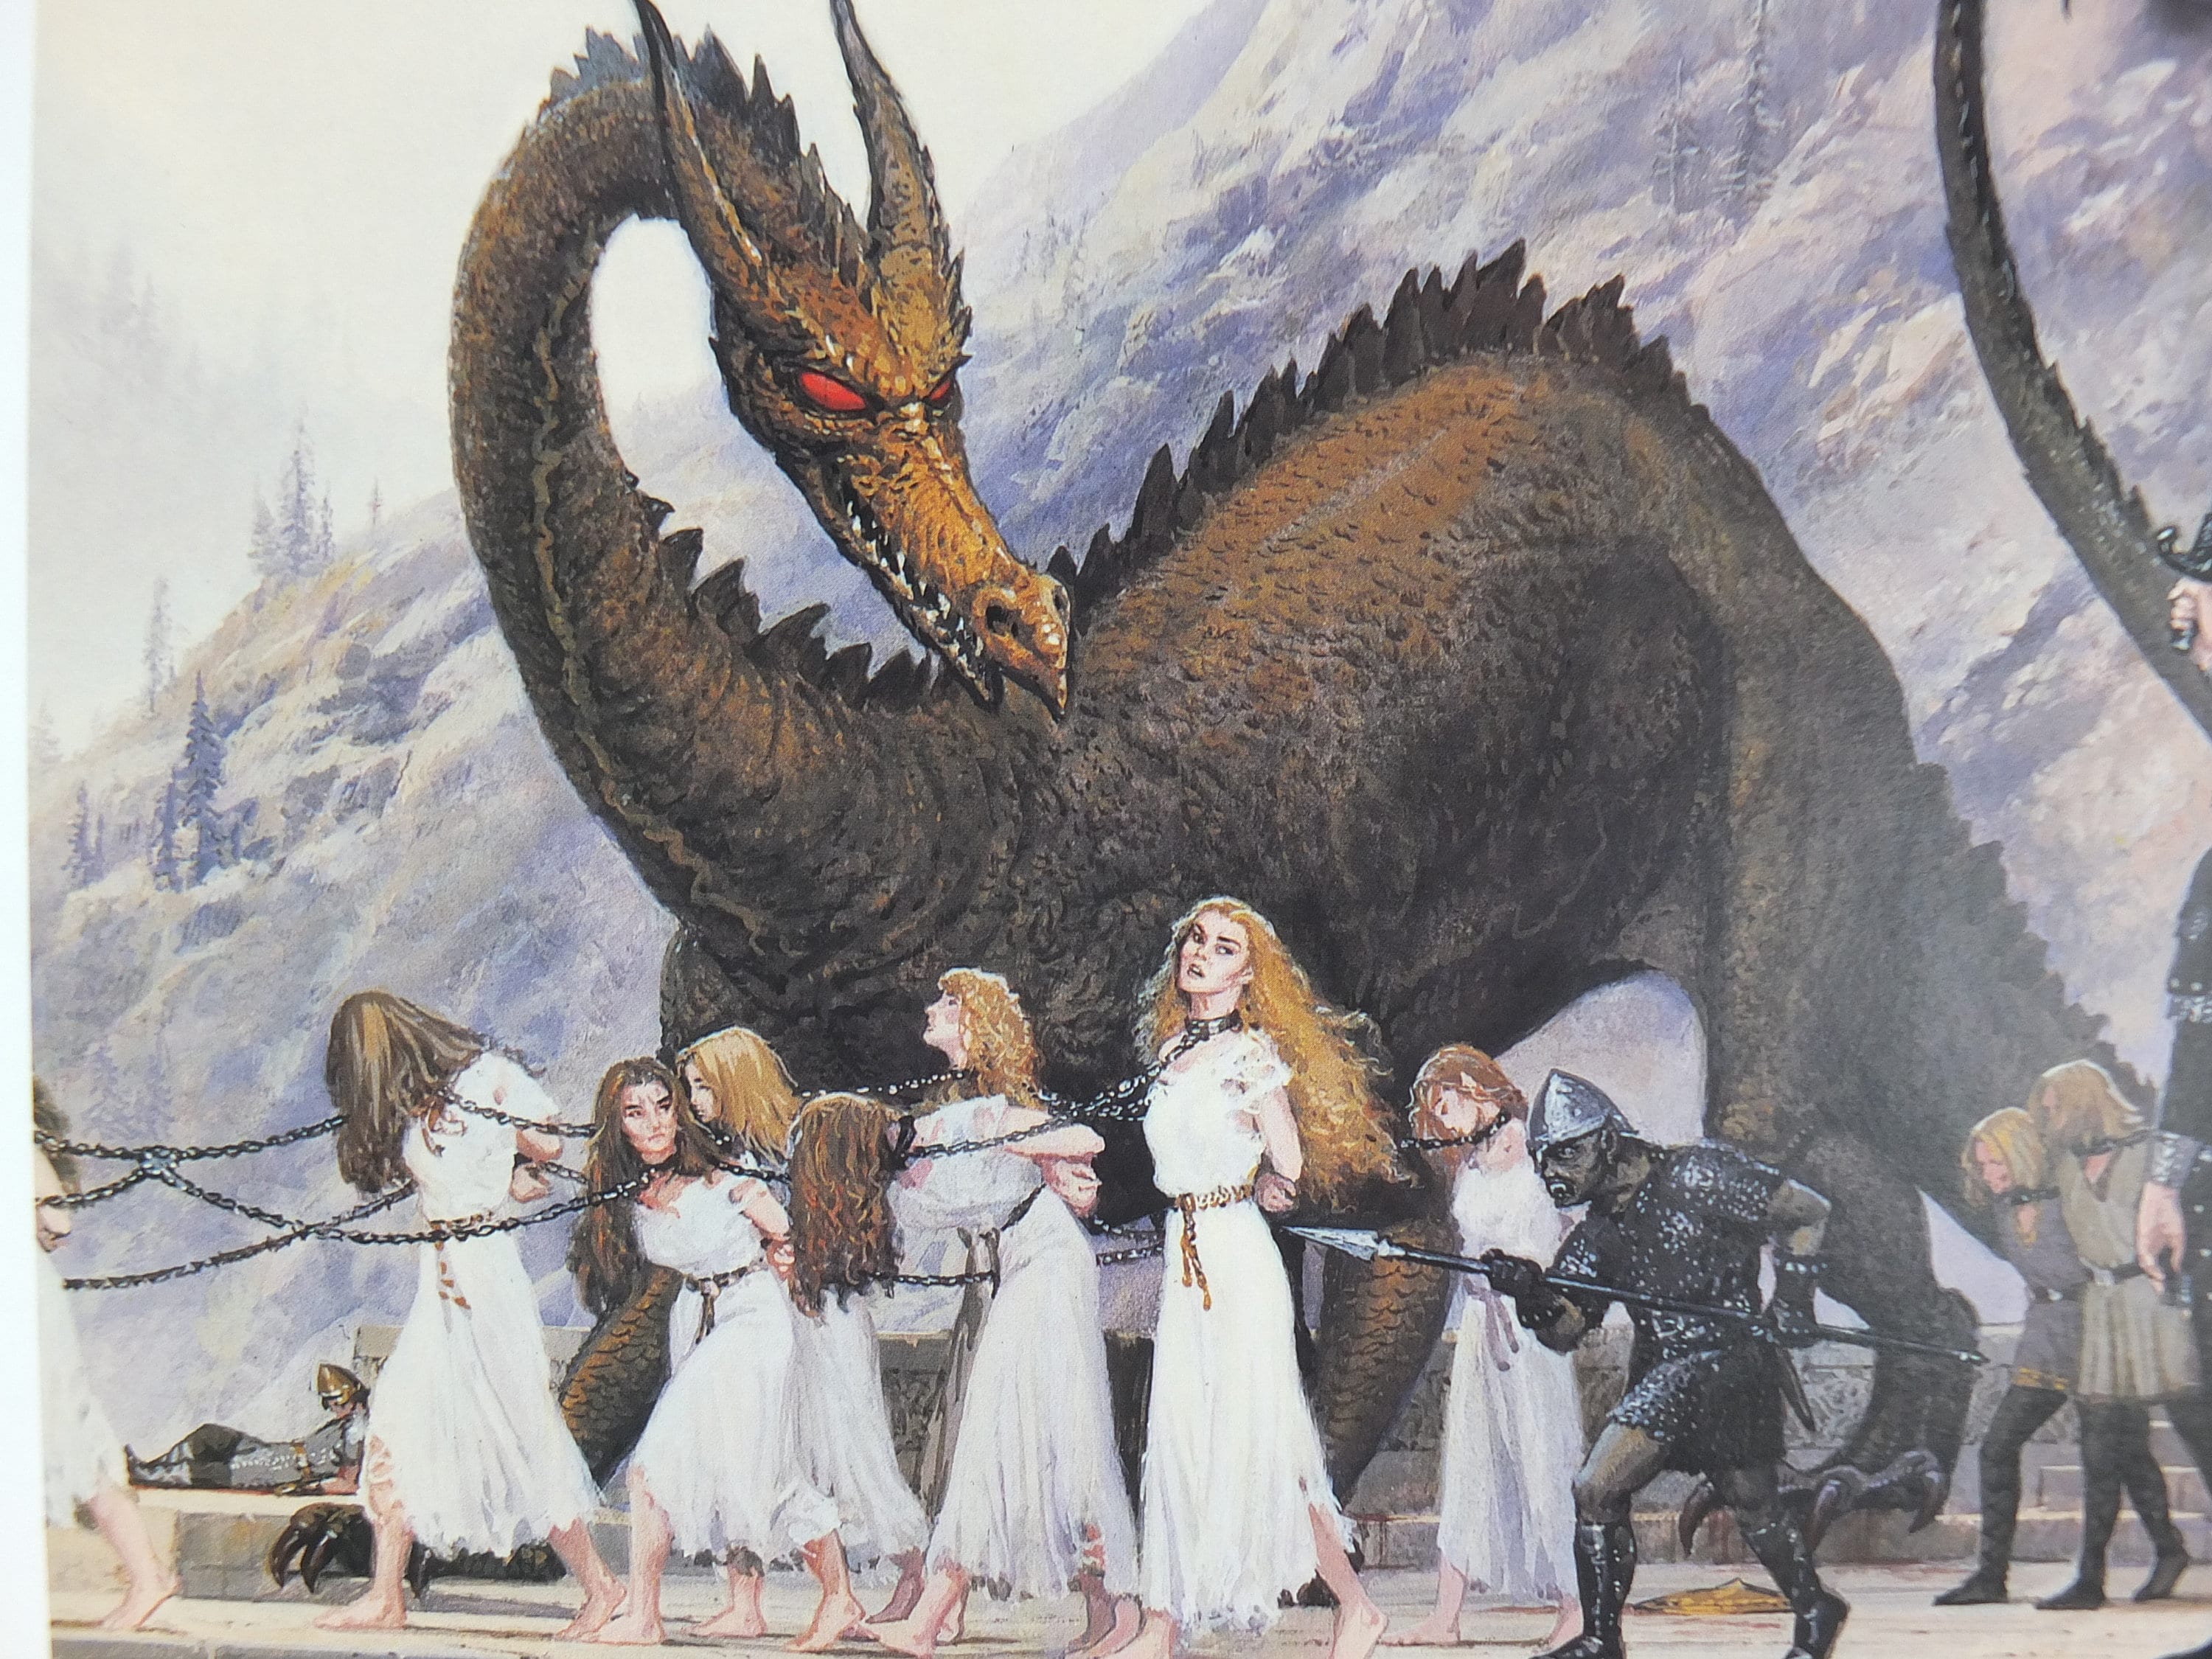 Tolkien Poster Print: Nienor and Glaurung · khorazir · Online Store  Powered by Storenvy